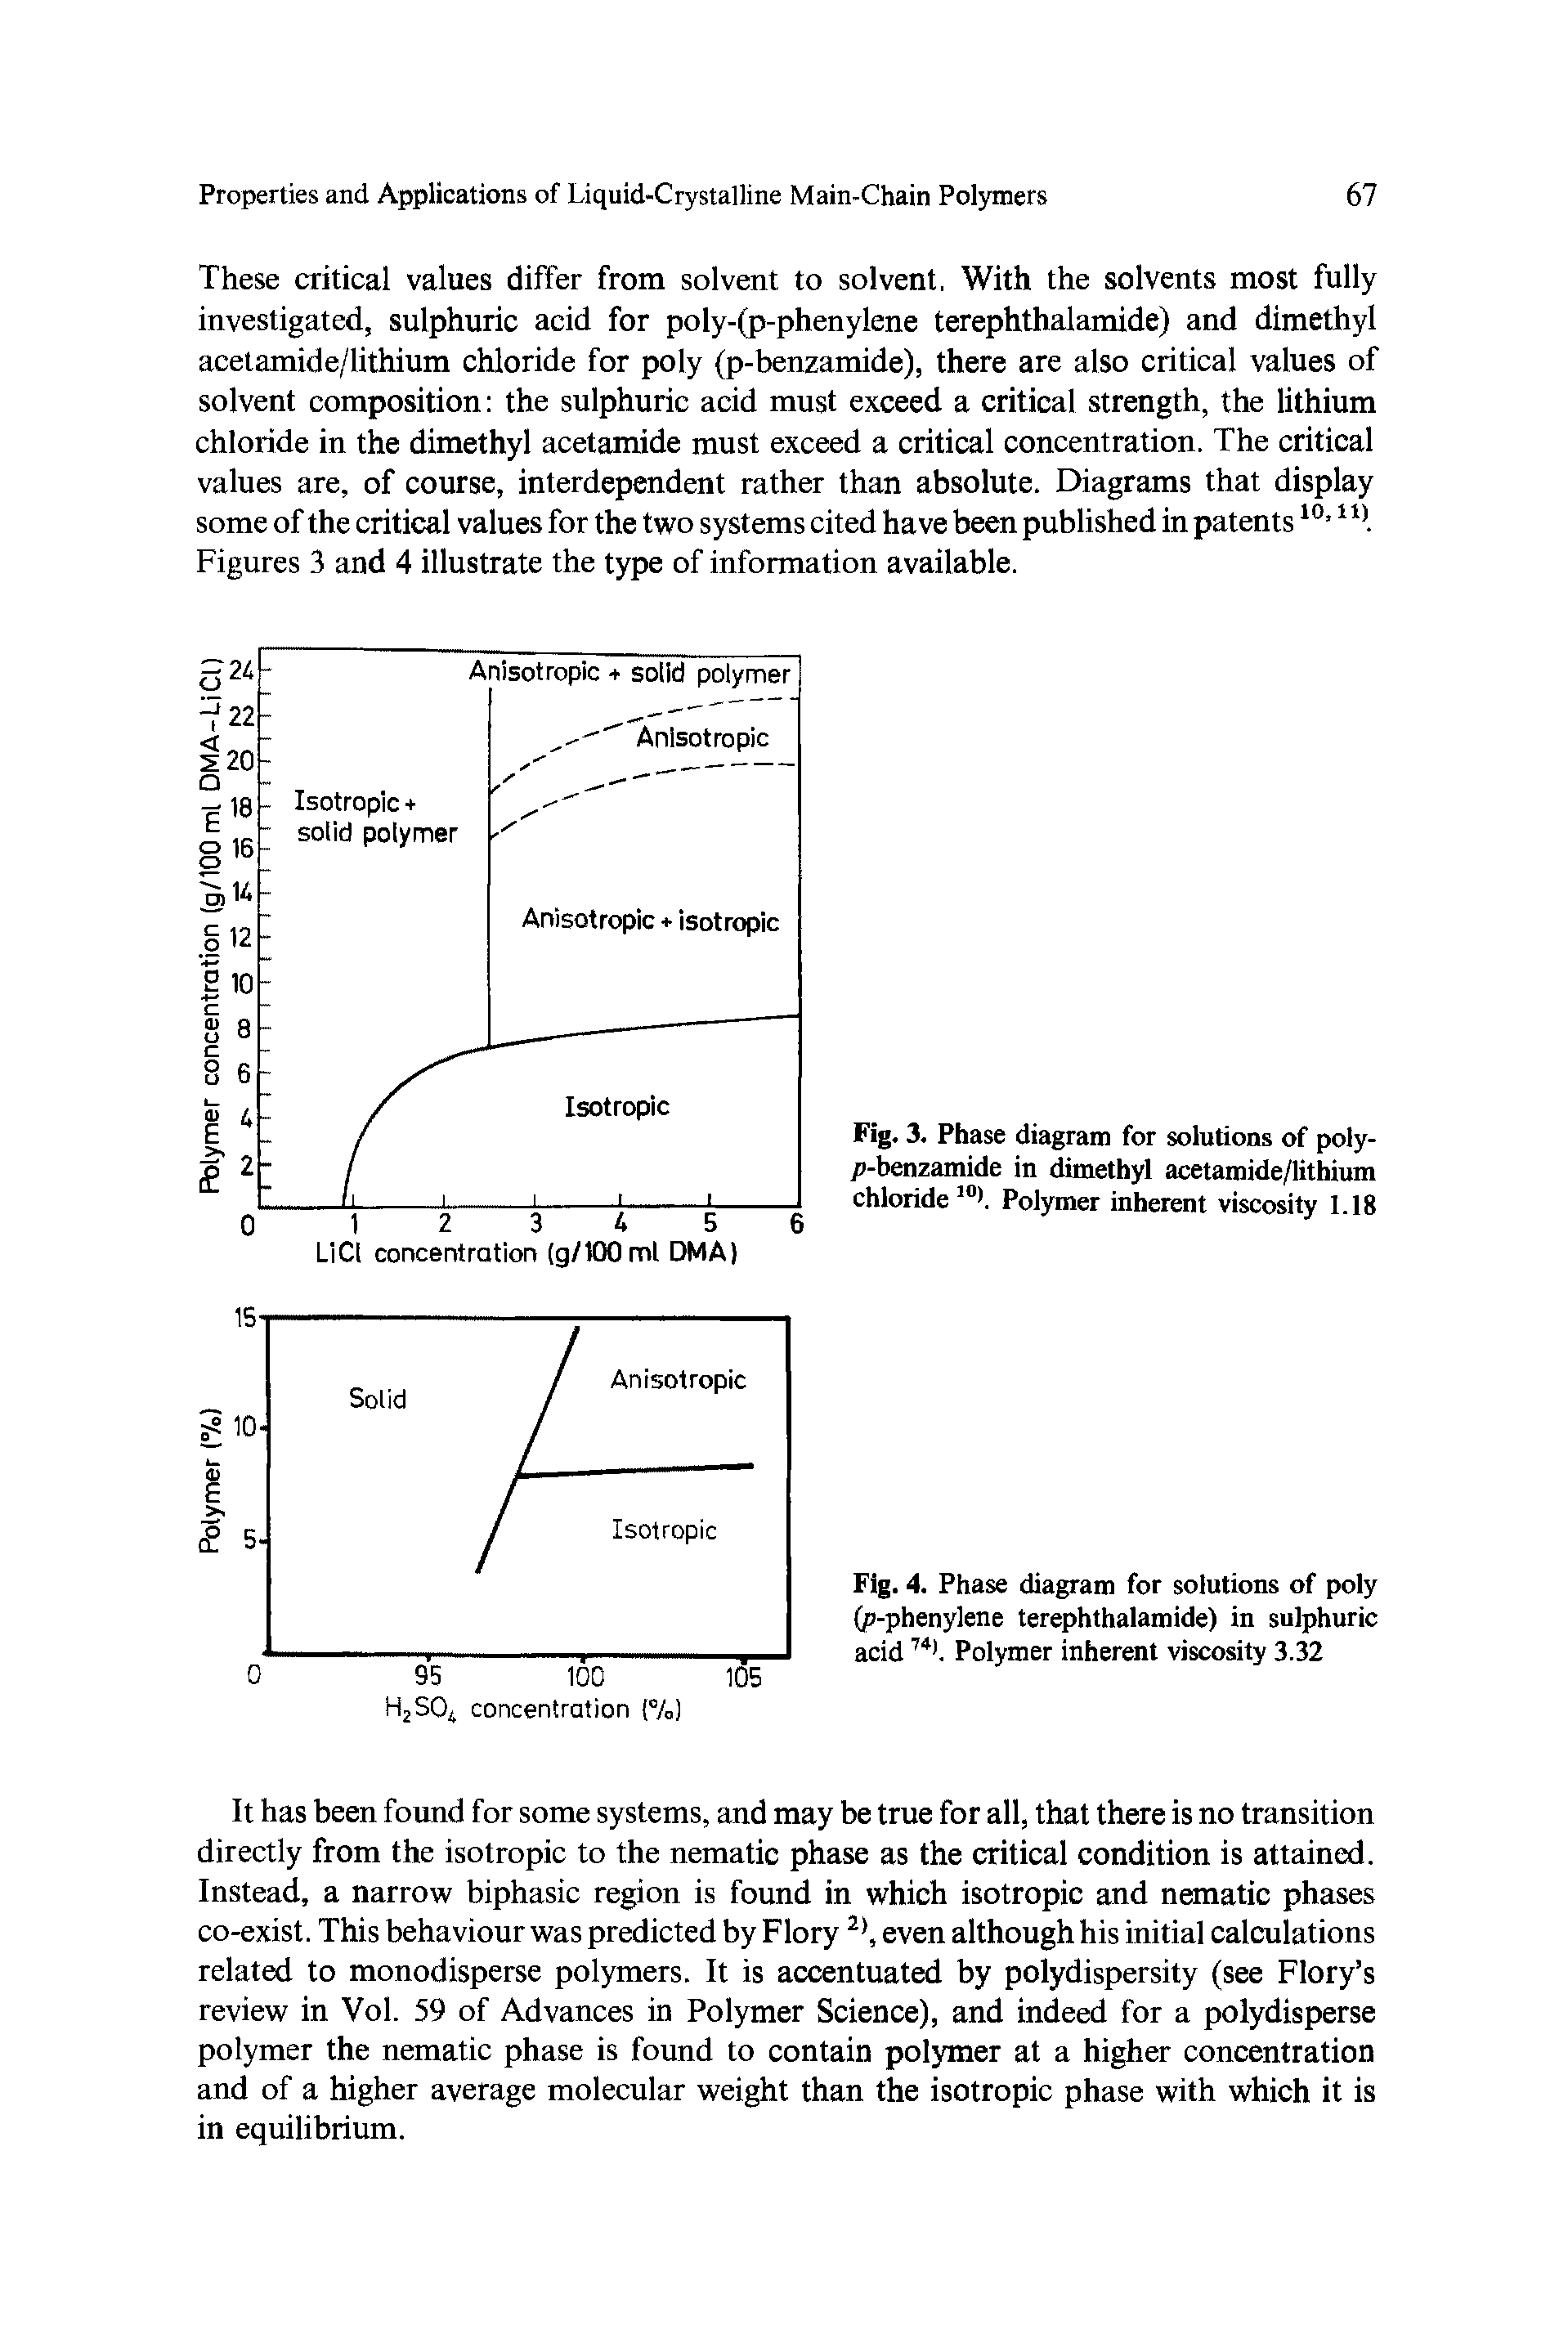 Fig. 4. Phase diagram for solutions of poly (p-phenylene terephthalamide) in sulphuric acid74). Polymer inherent viscosity 3.32...